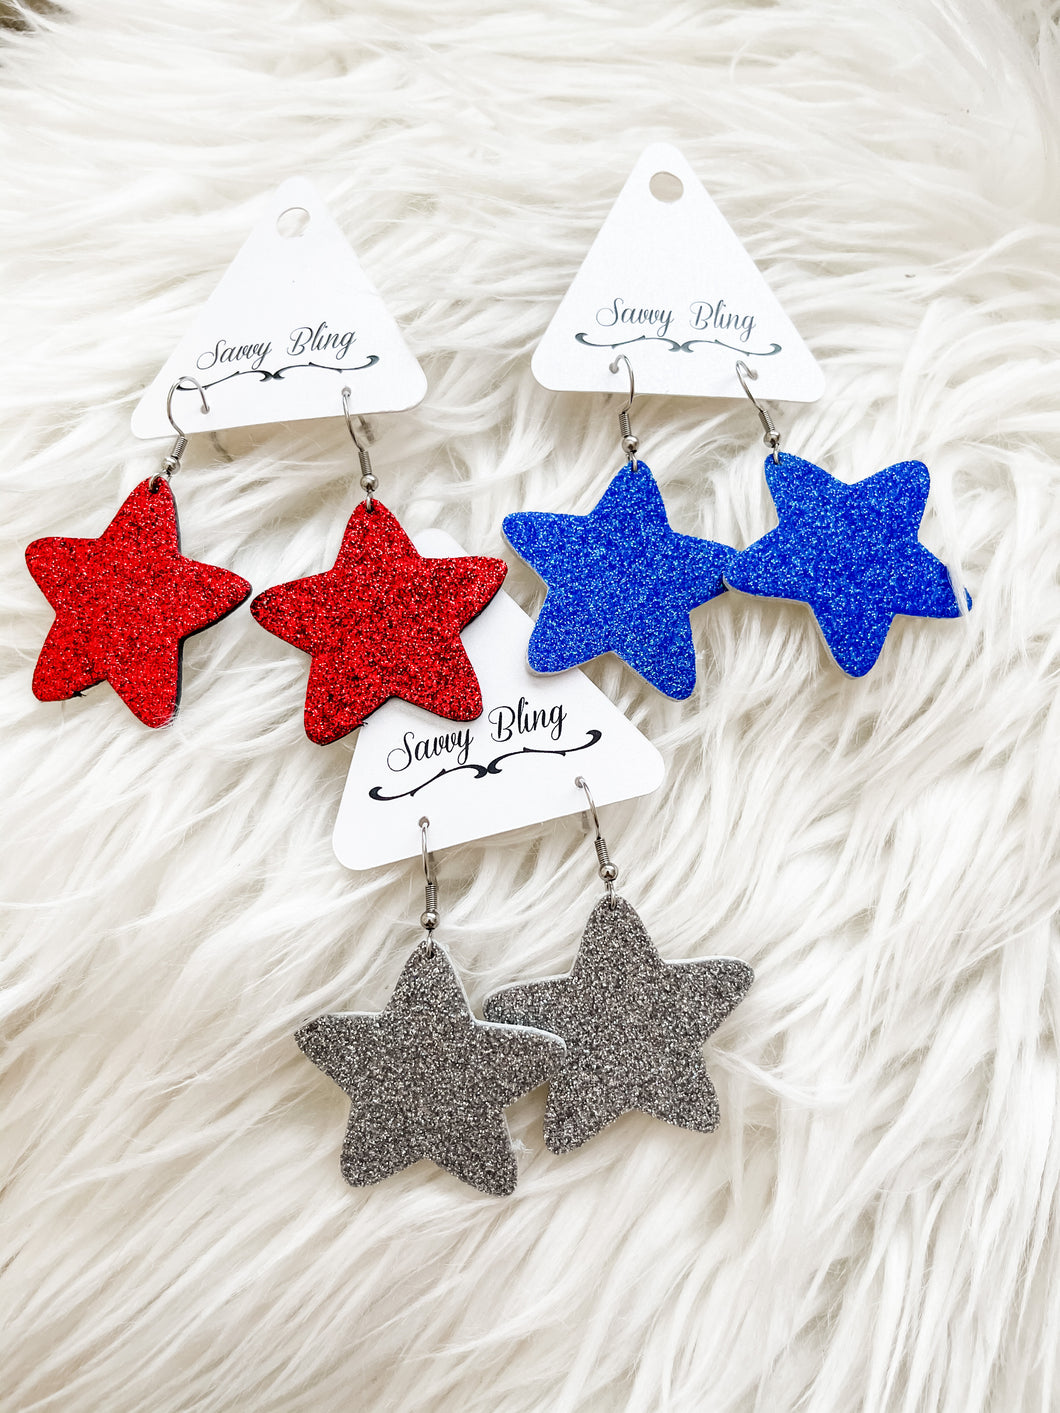 Seeing Stars- Red, White and Blue